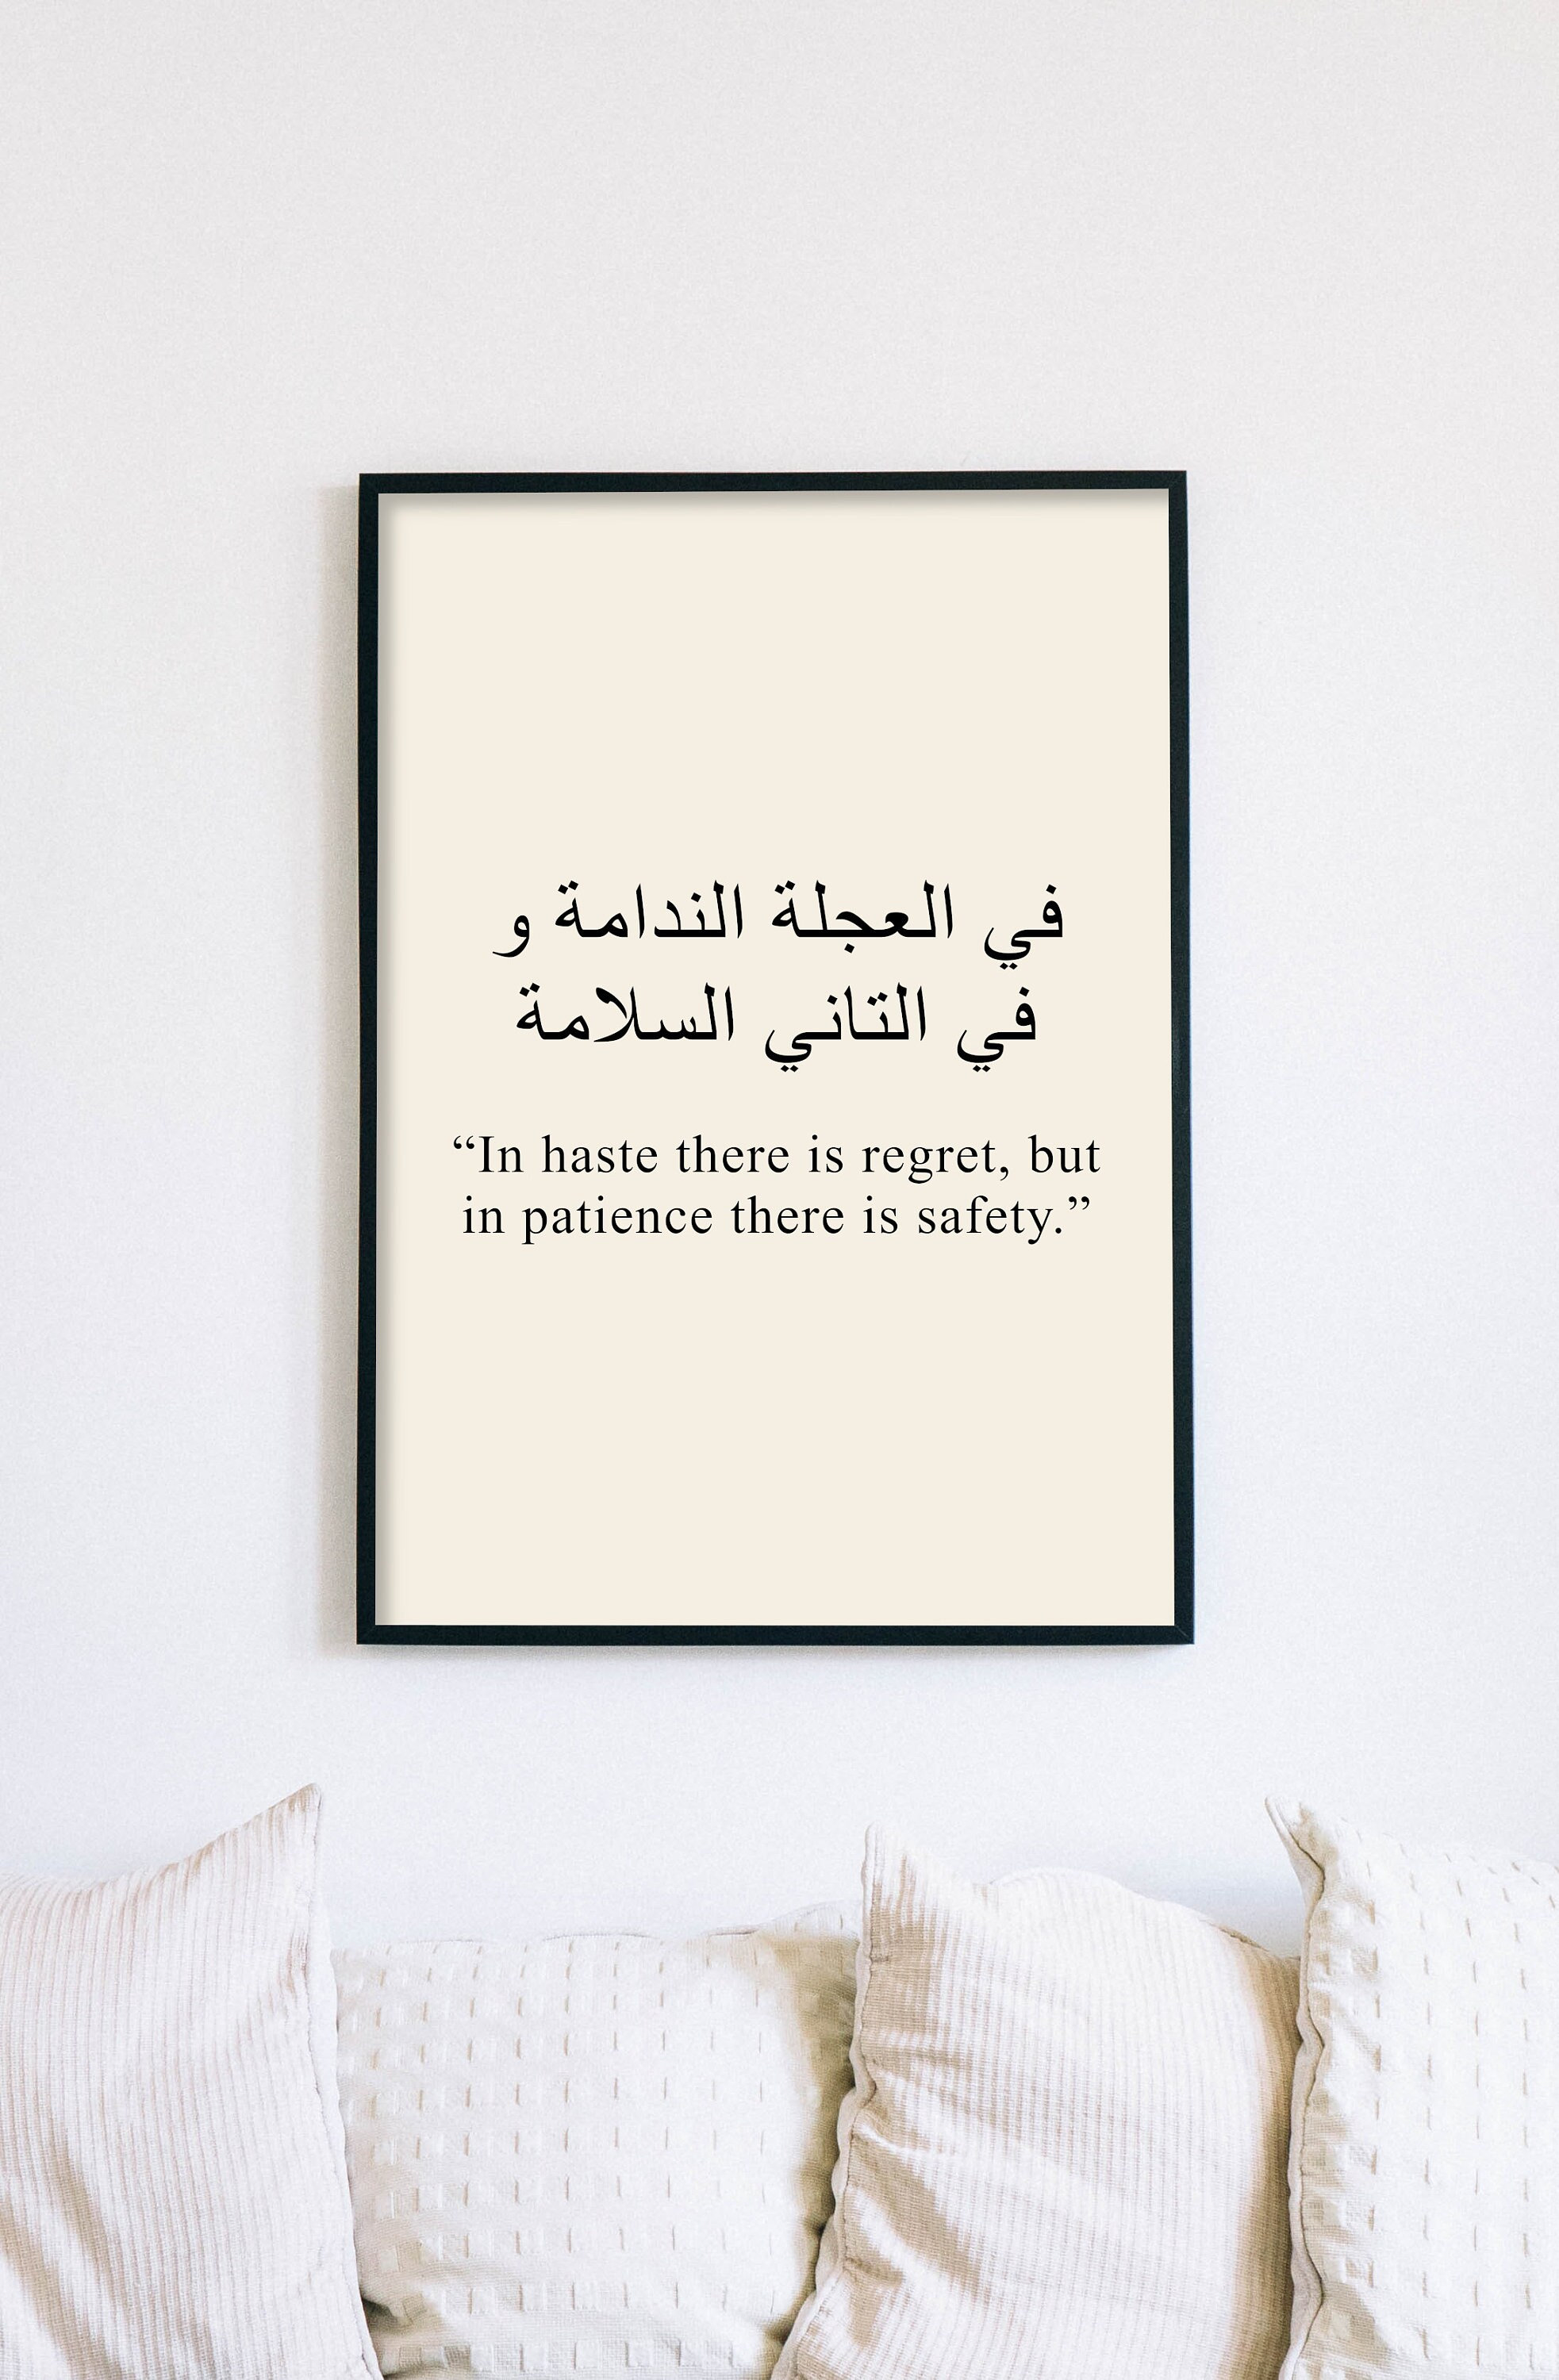 Arabic Quote in Haste There is Regret but in Patience image